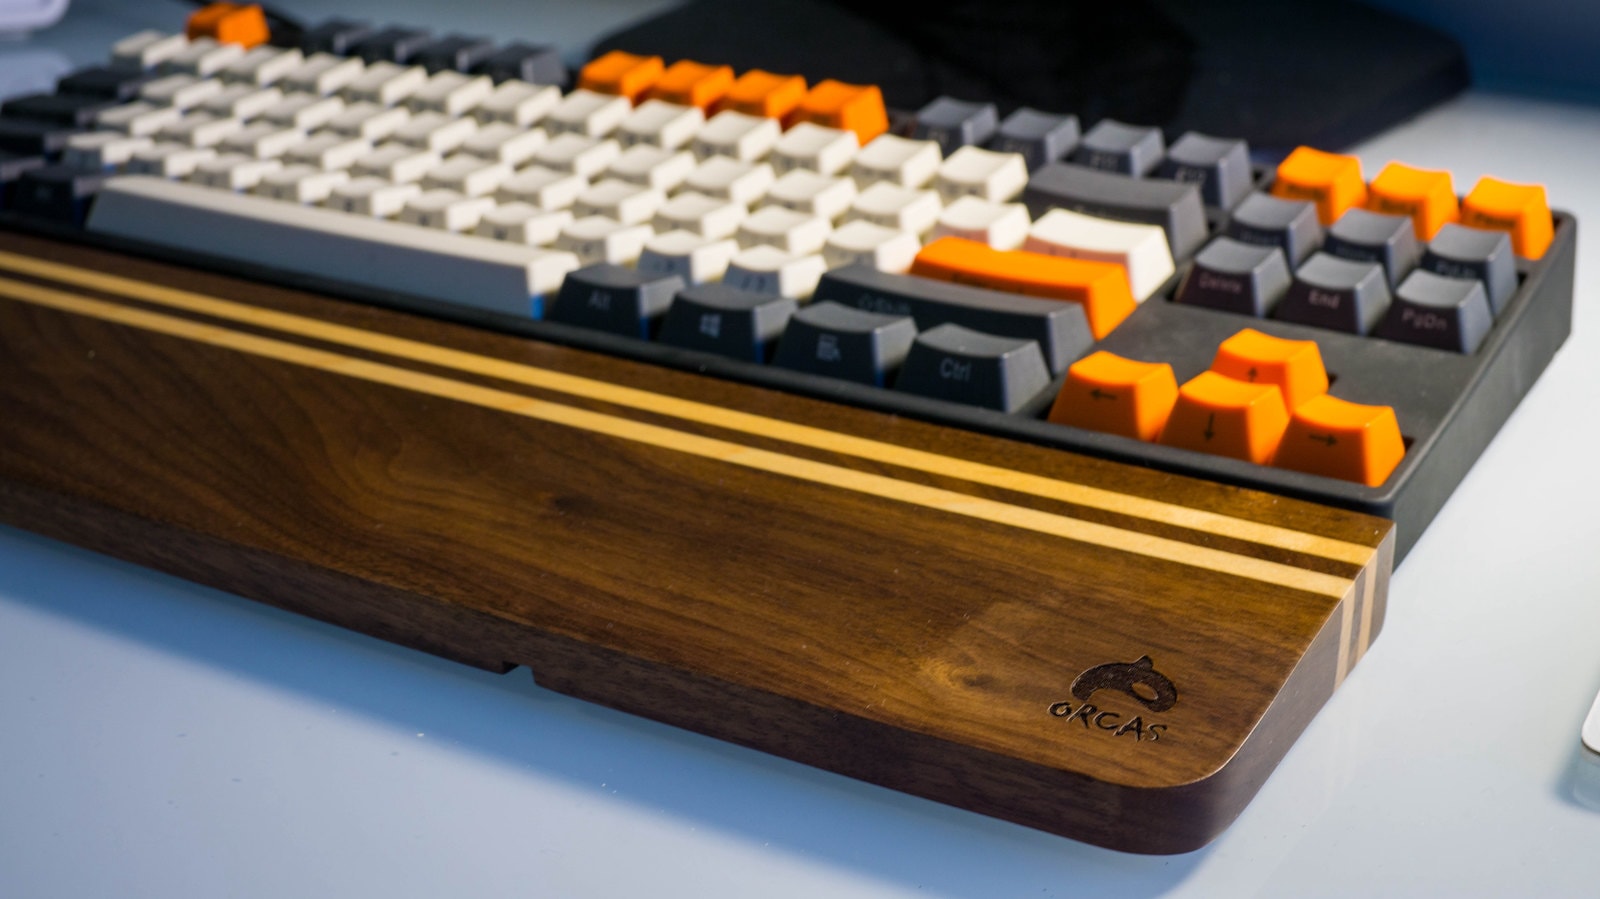 Orcas Wood Mechanical Keyboard Wrist Rest supports you during your work and playtime